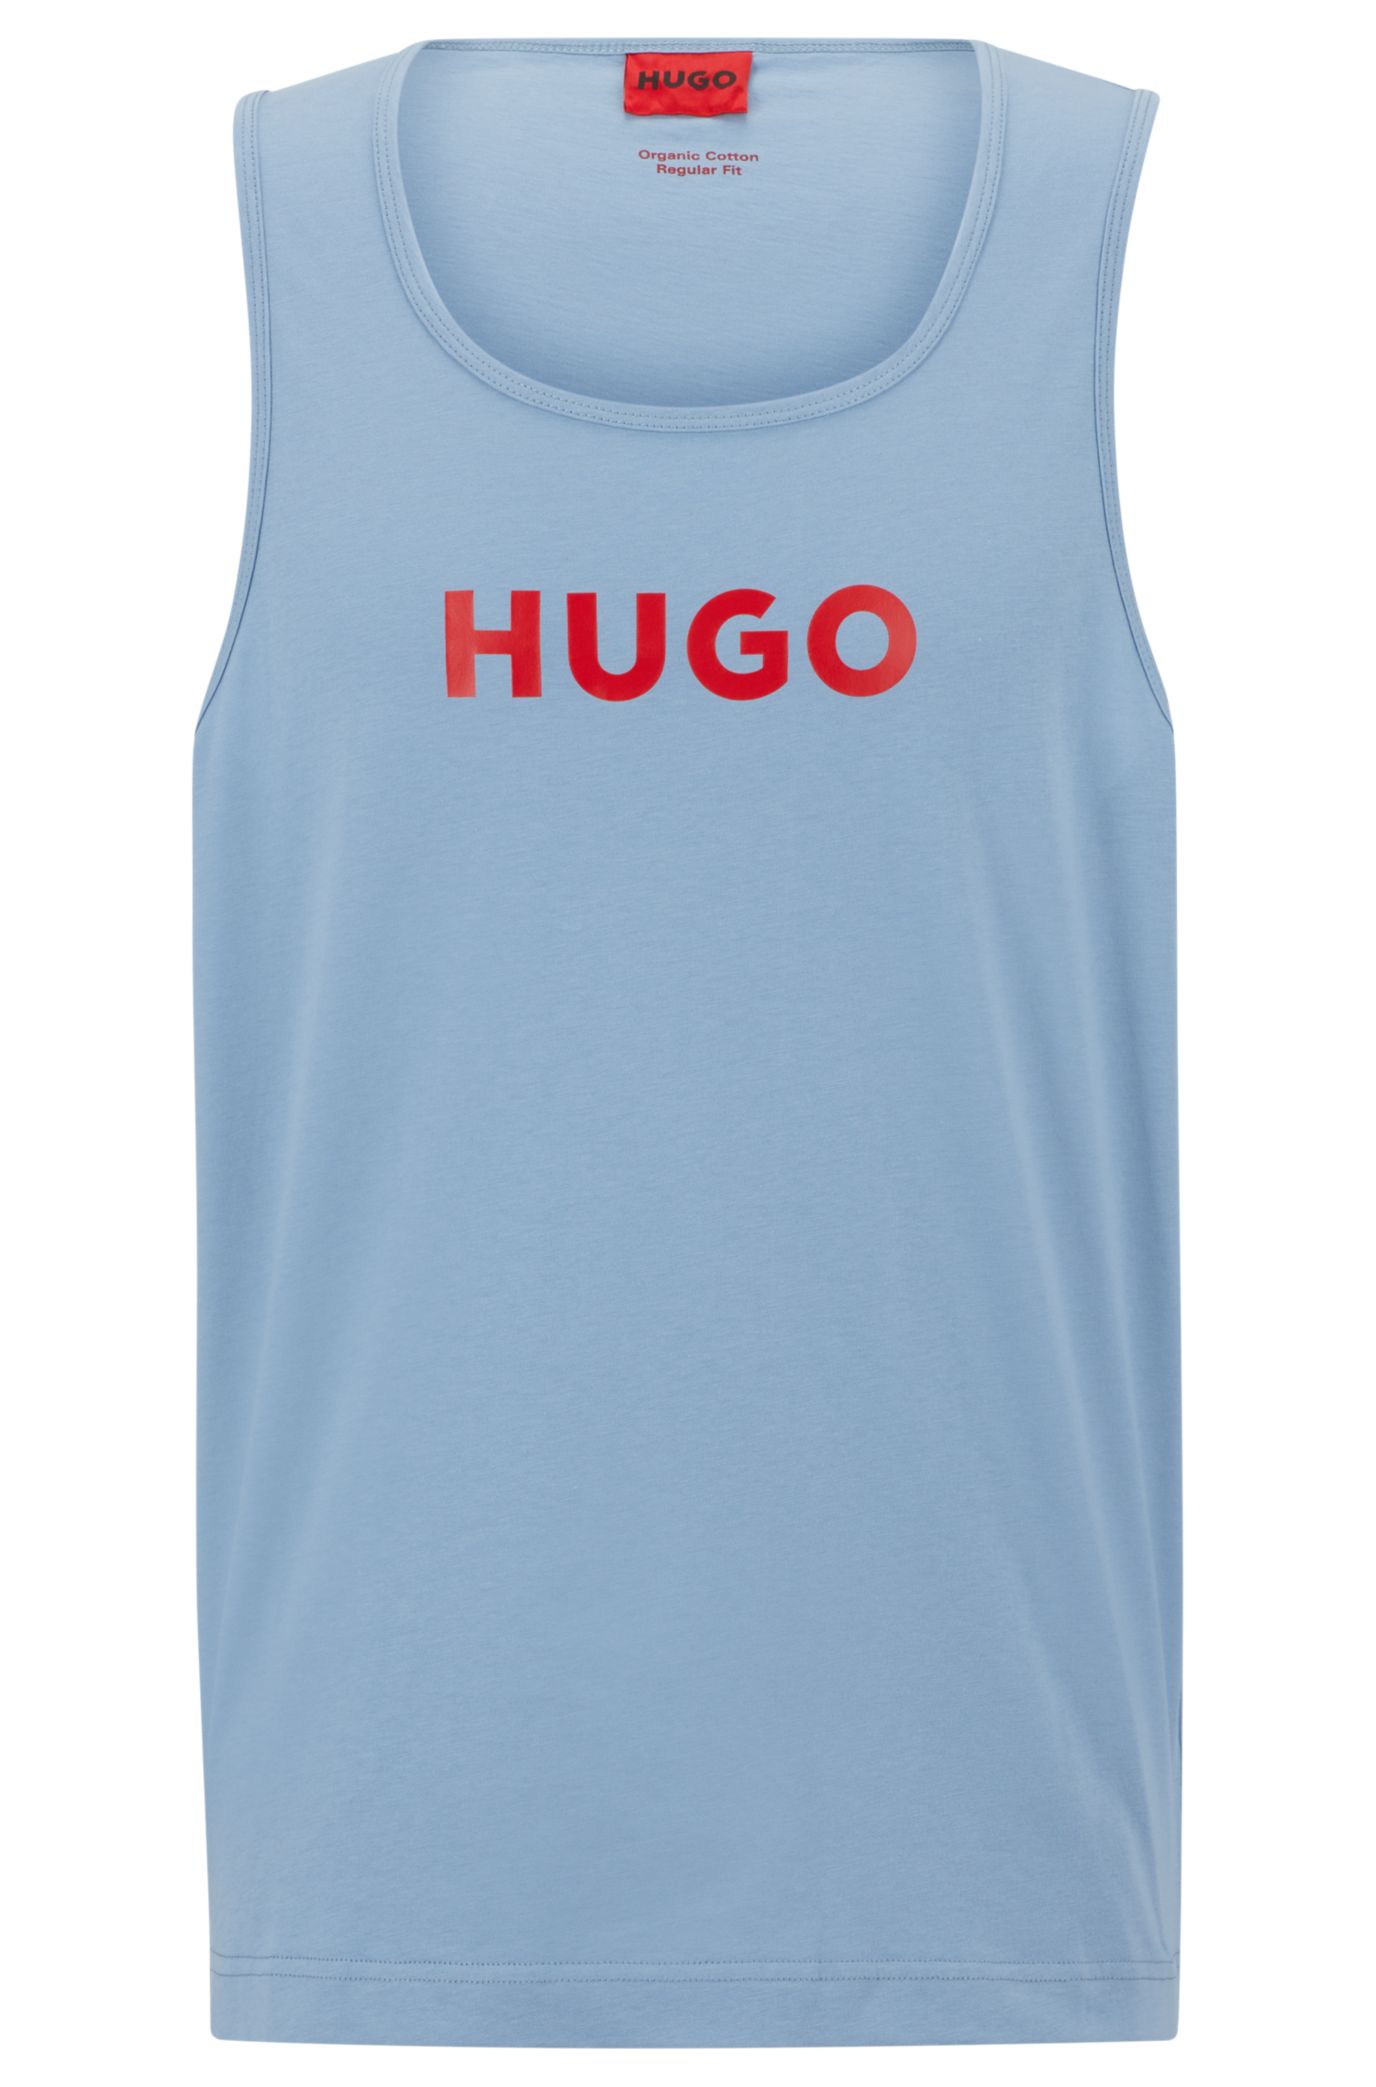 top with tank - HUGO red logo Cotton